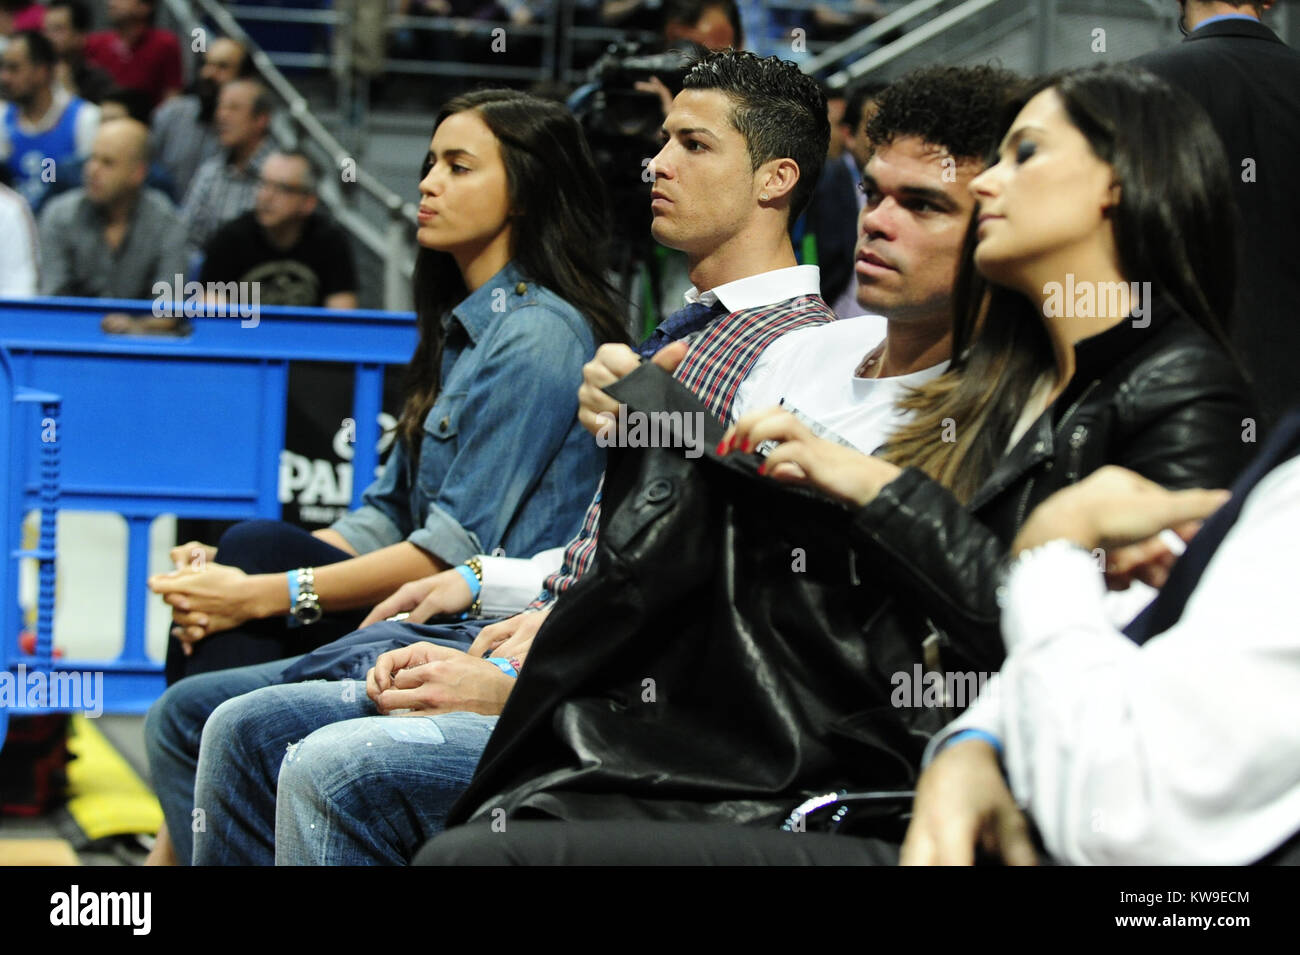 MADRID, SPAIN - MARCH 20: Cristiano Ronaldo, Irina Shayk and Marcelo attend  the basketball match between Real Madrid and CSKA Moscow in Madrid. on  March 20, 2014 in Madrid, Spain People: Cristiano